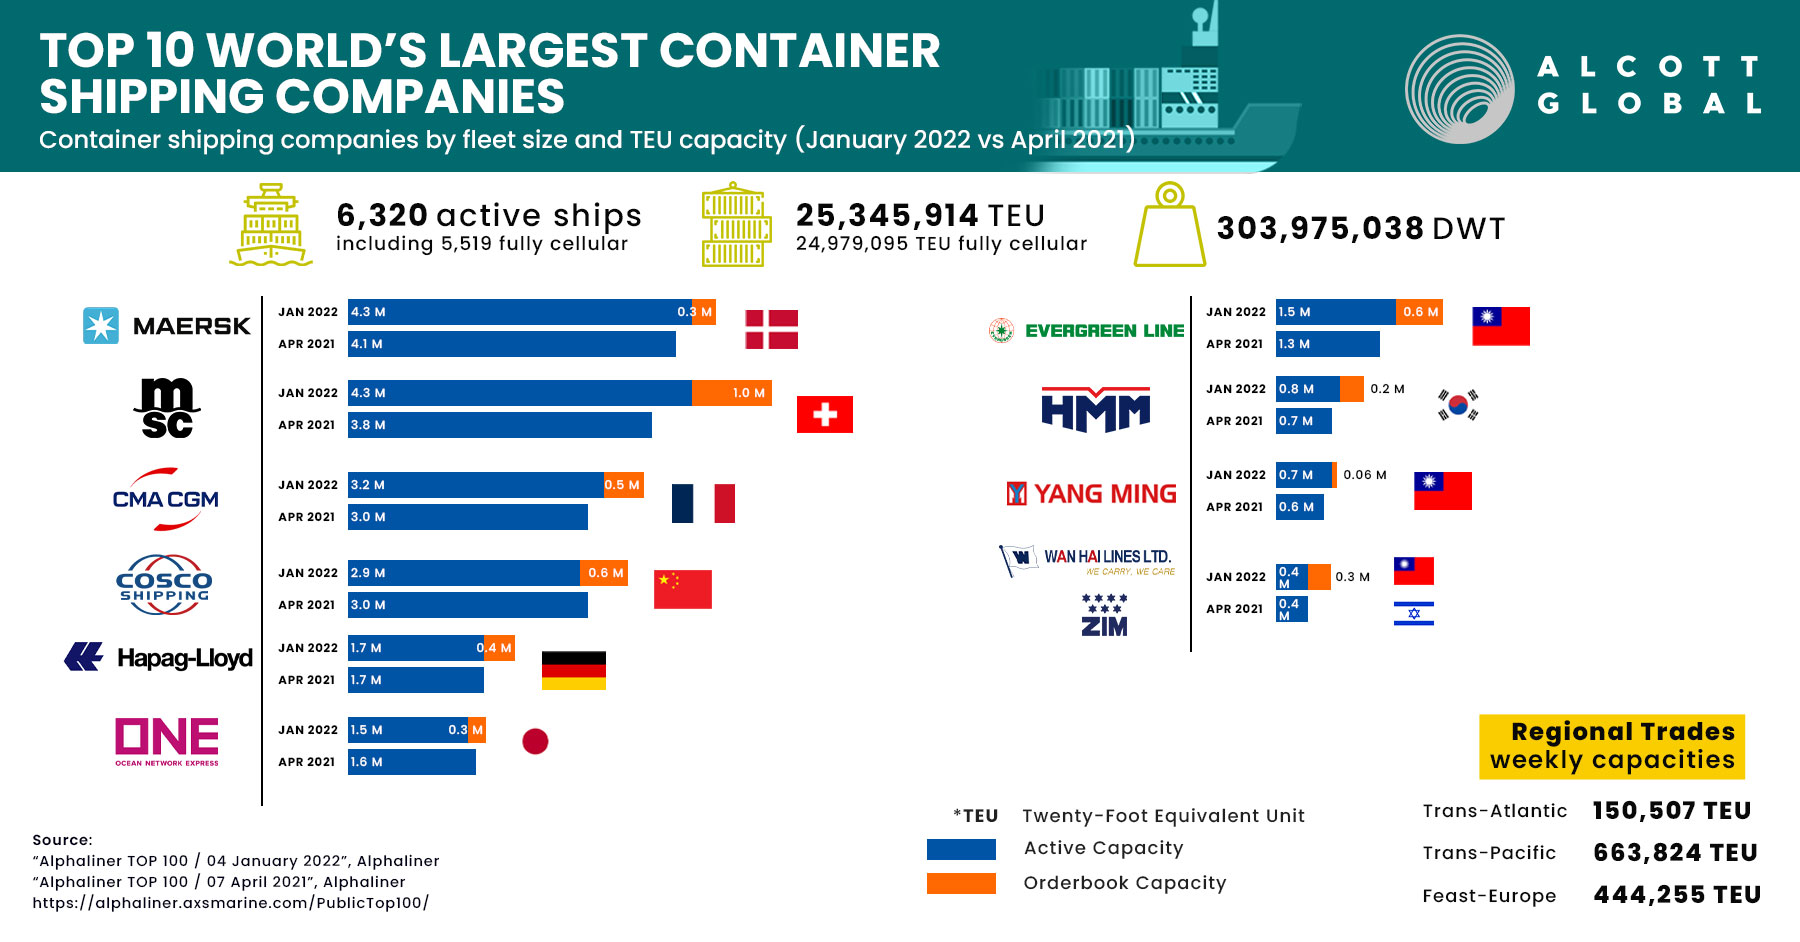 Top 10 - World's Largest Container Shipping Companies in January 2022 vs. April 2021 Featured Image